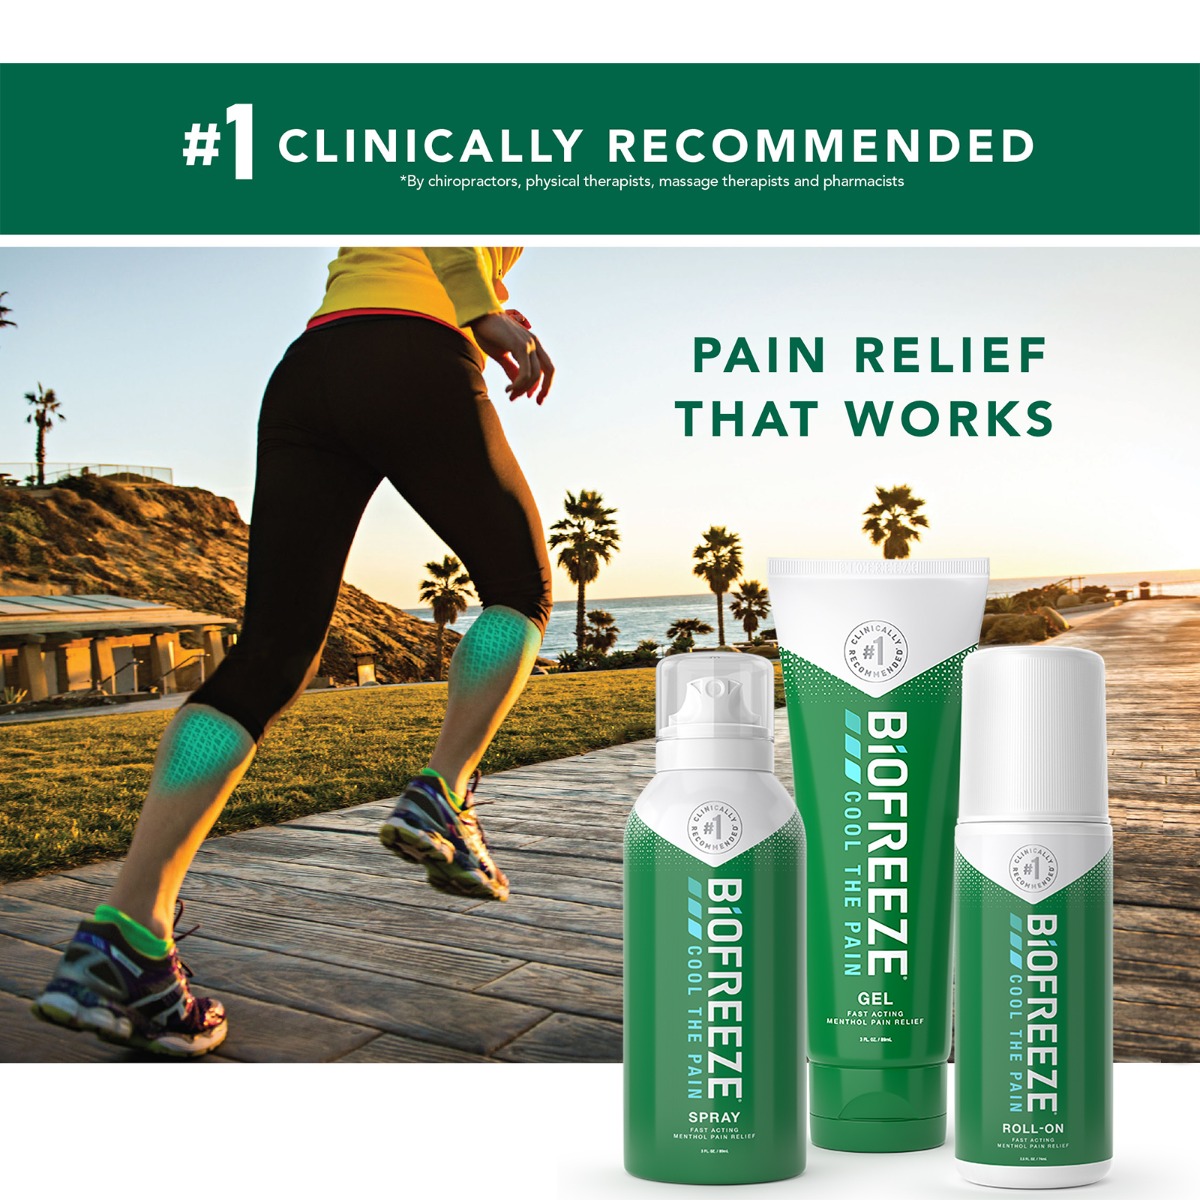 3 different Biofreeze Classic products for fast acting pain relief pictured left to right: spray bottle, squeeze bottle & roll-on.